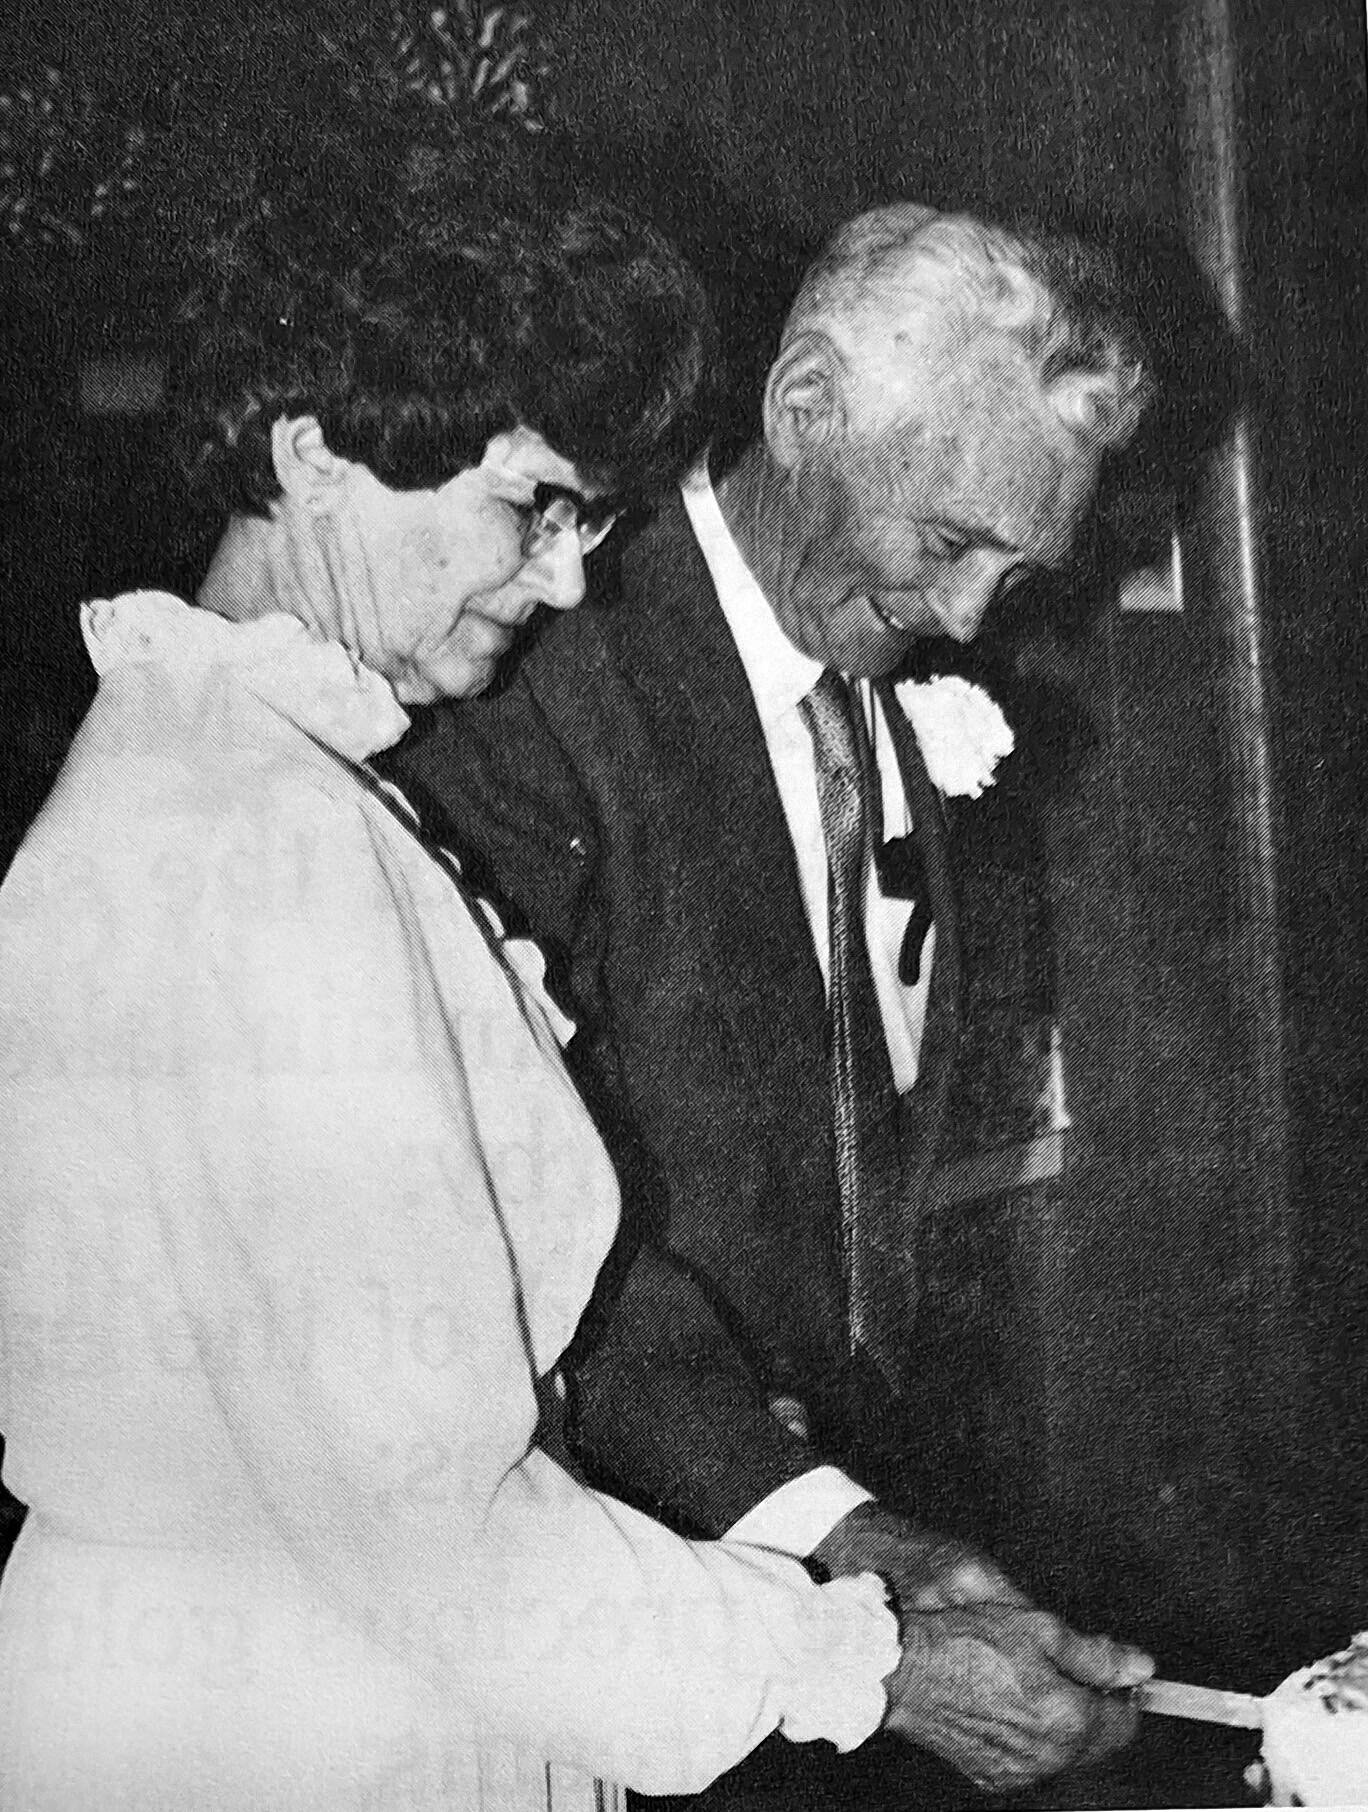 In 1983, nine years after Lawrence Keeler died, his wife Lorna remarried to longtime area resident Steve Zawistowski. Photo from the Steve Zawistowski story in “In Those Days.”